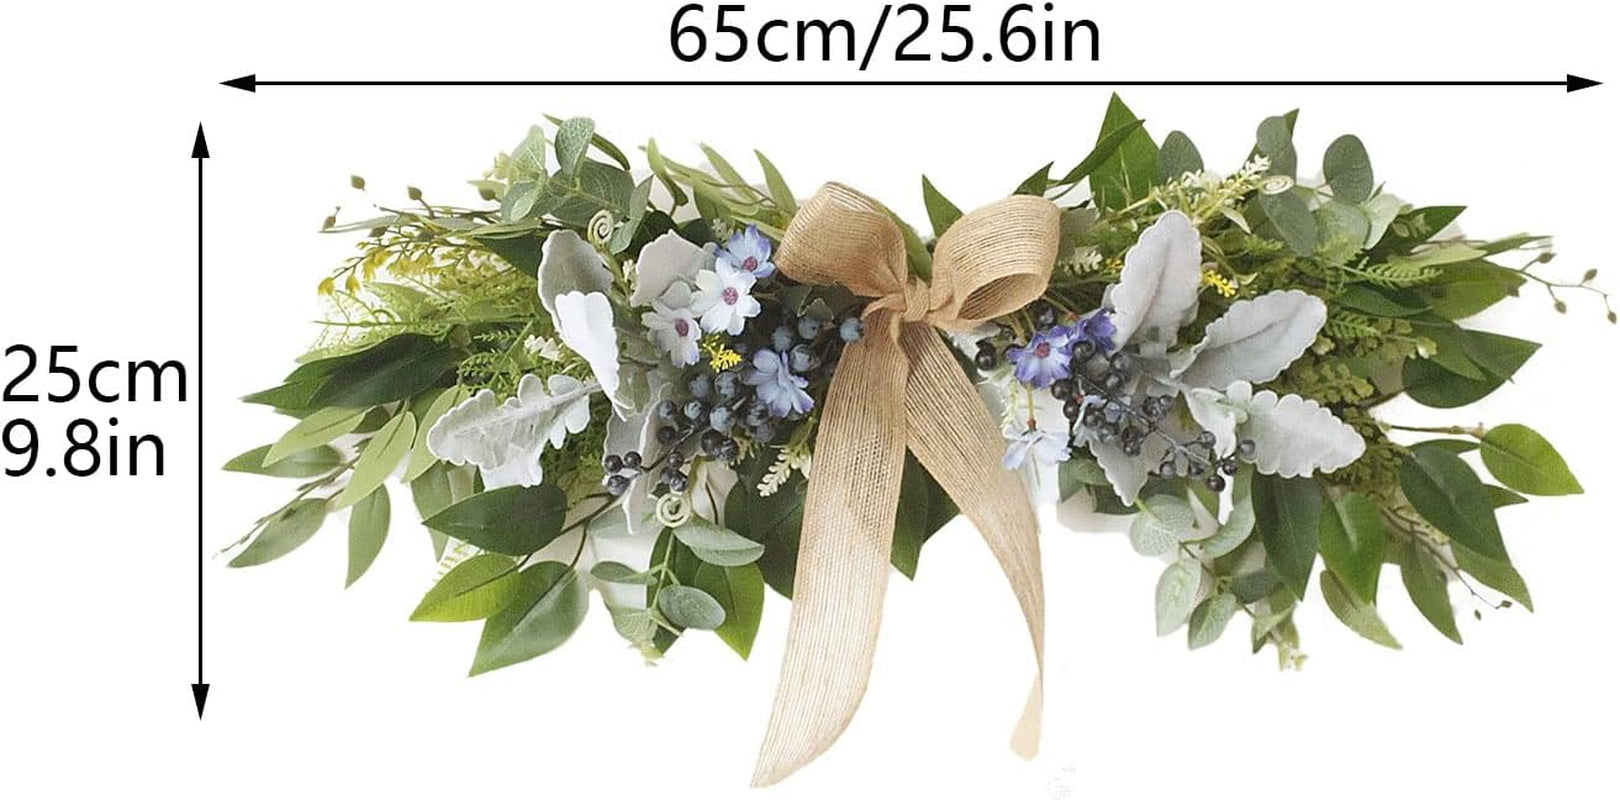 Artificial Eucalyptus Swag with Daisy Flower 25.6Inch Greenery Swag with Bow and Flocking Leaves Berries Farmhouse Decorative Swag for Home Wedding Wall Door Decor, Multicolor, 65Cm/25.6Inch